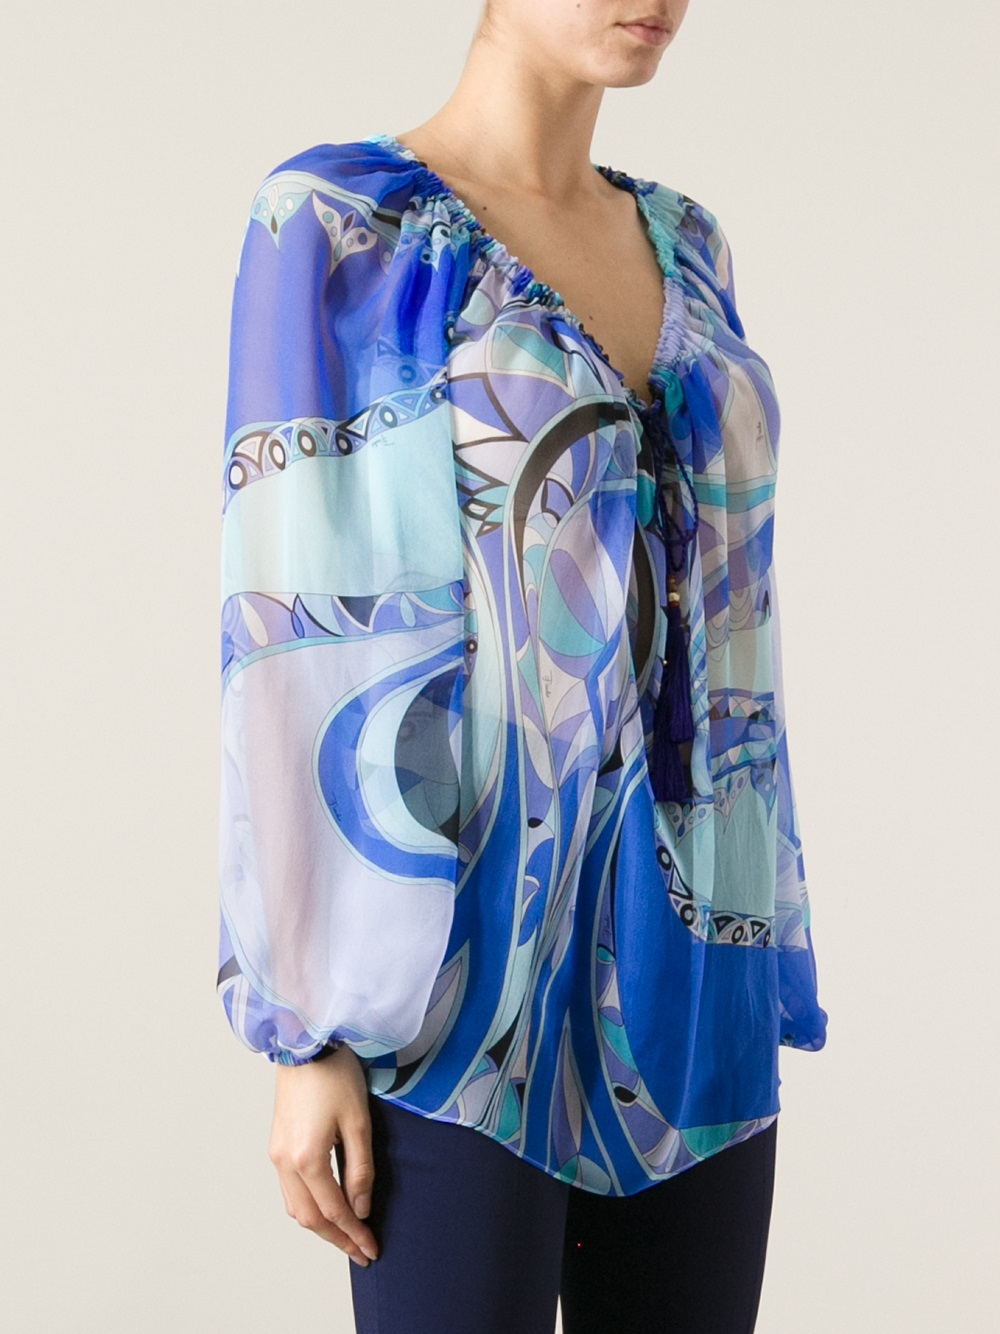 Lyst - Emilio pucci Printed Gypsy Style Blouse in Blue